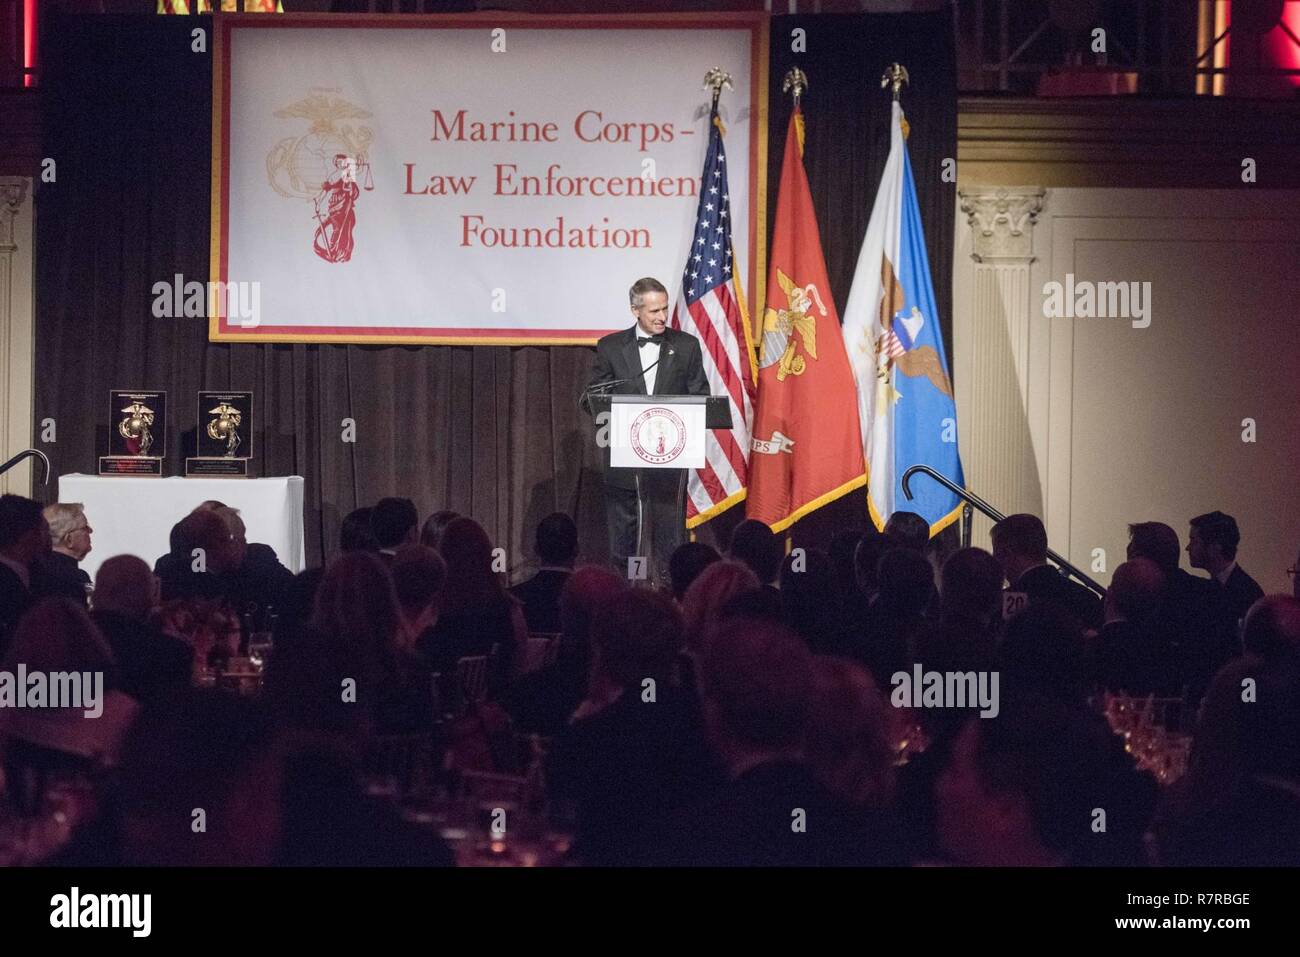 Retired Marine Corps Gen. Peter Pace, 16th chairman of the Joint Chiefs of Staff, gives remarks after receiving the 2017 Commandant's Leadership award duringthe Marine Corps Law Enforcement Foundation (MC-LEF) Gala, in New York, March 30, 2017. Since its inception 1995, MC-LEF has awarded nearly $70 million in scholarships and other humanitarian assistance to the children on fallen Marines and federal law enforcement personnel. DoD Stock Photo